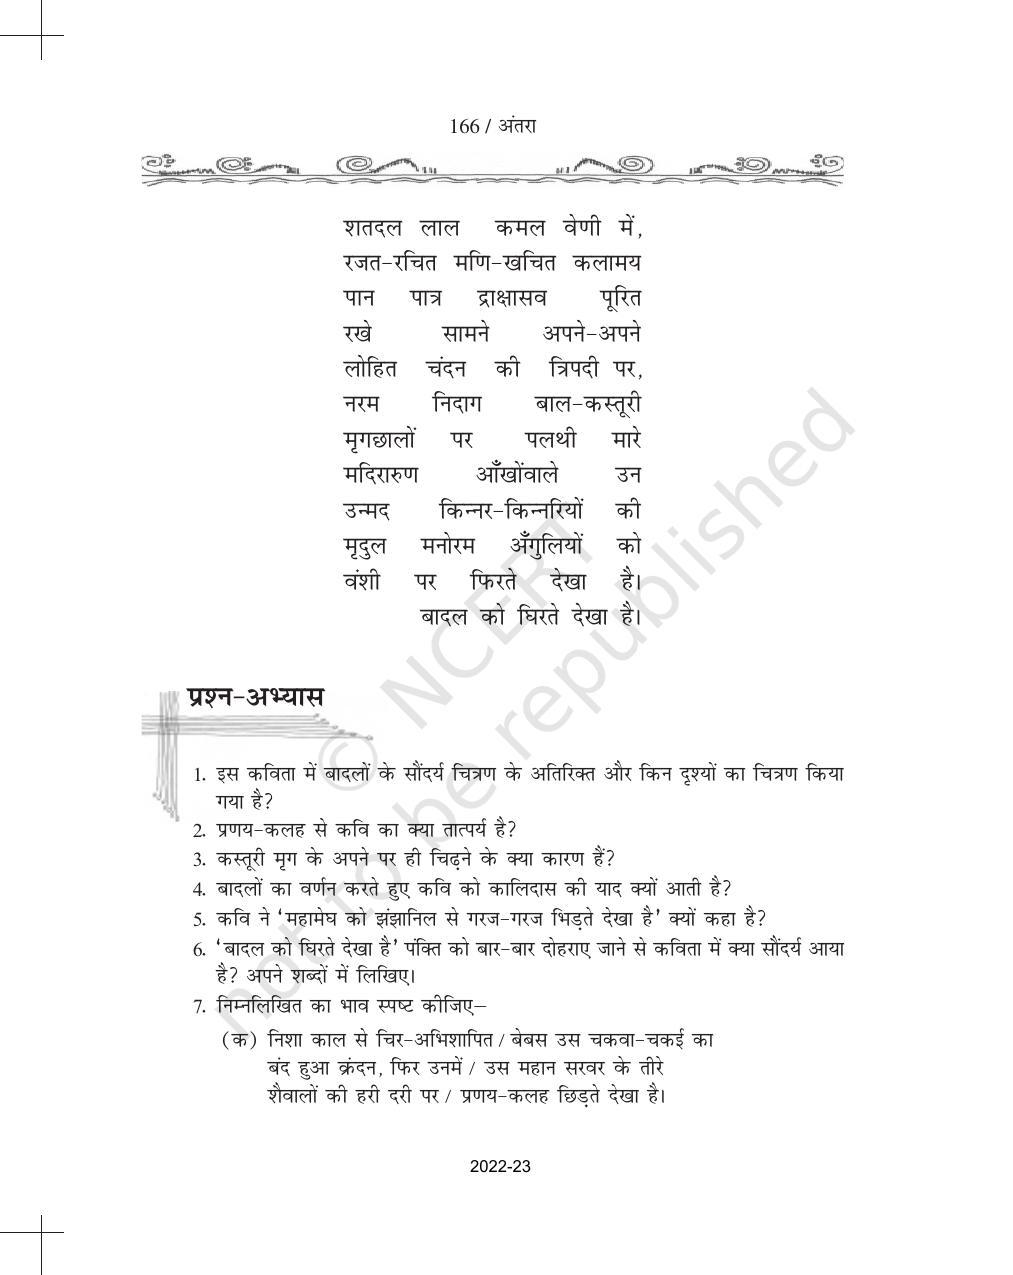 NCERT Book for Class 11 Hindi Antra Chapter 17 नागार्जुन - Page 6